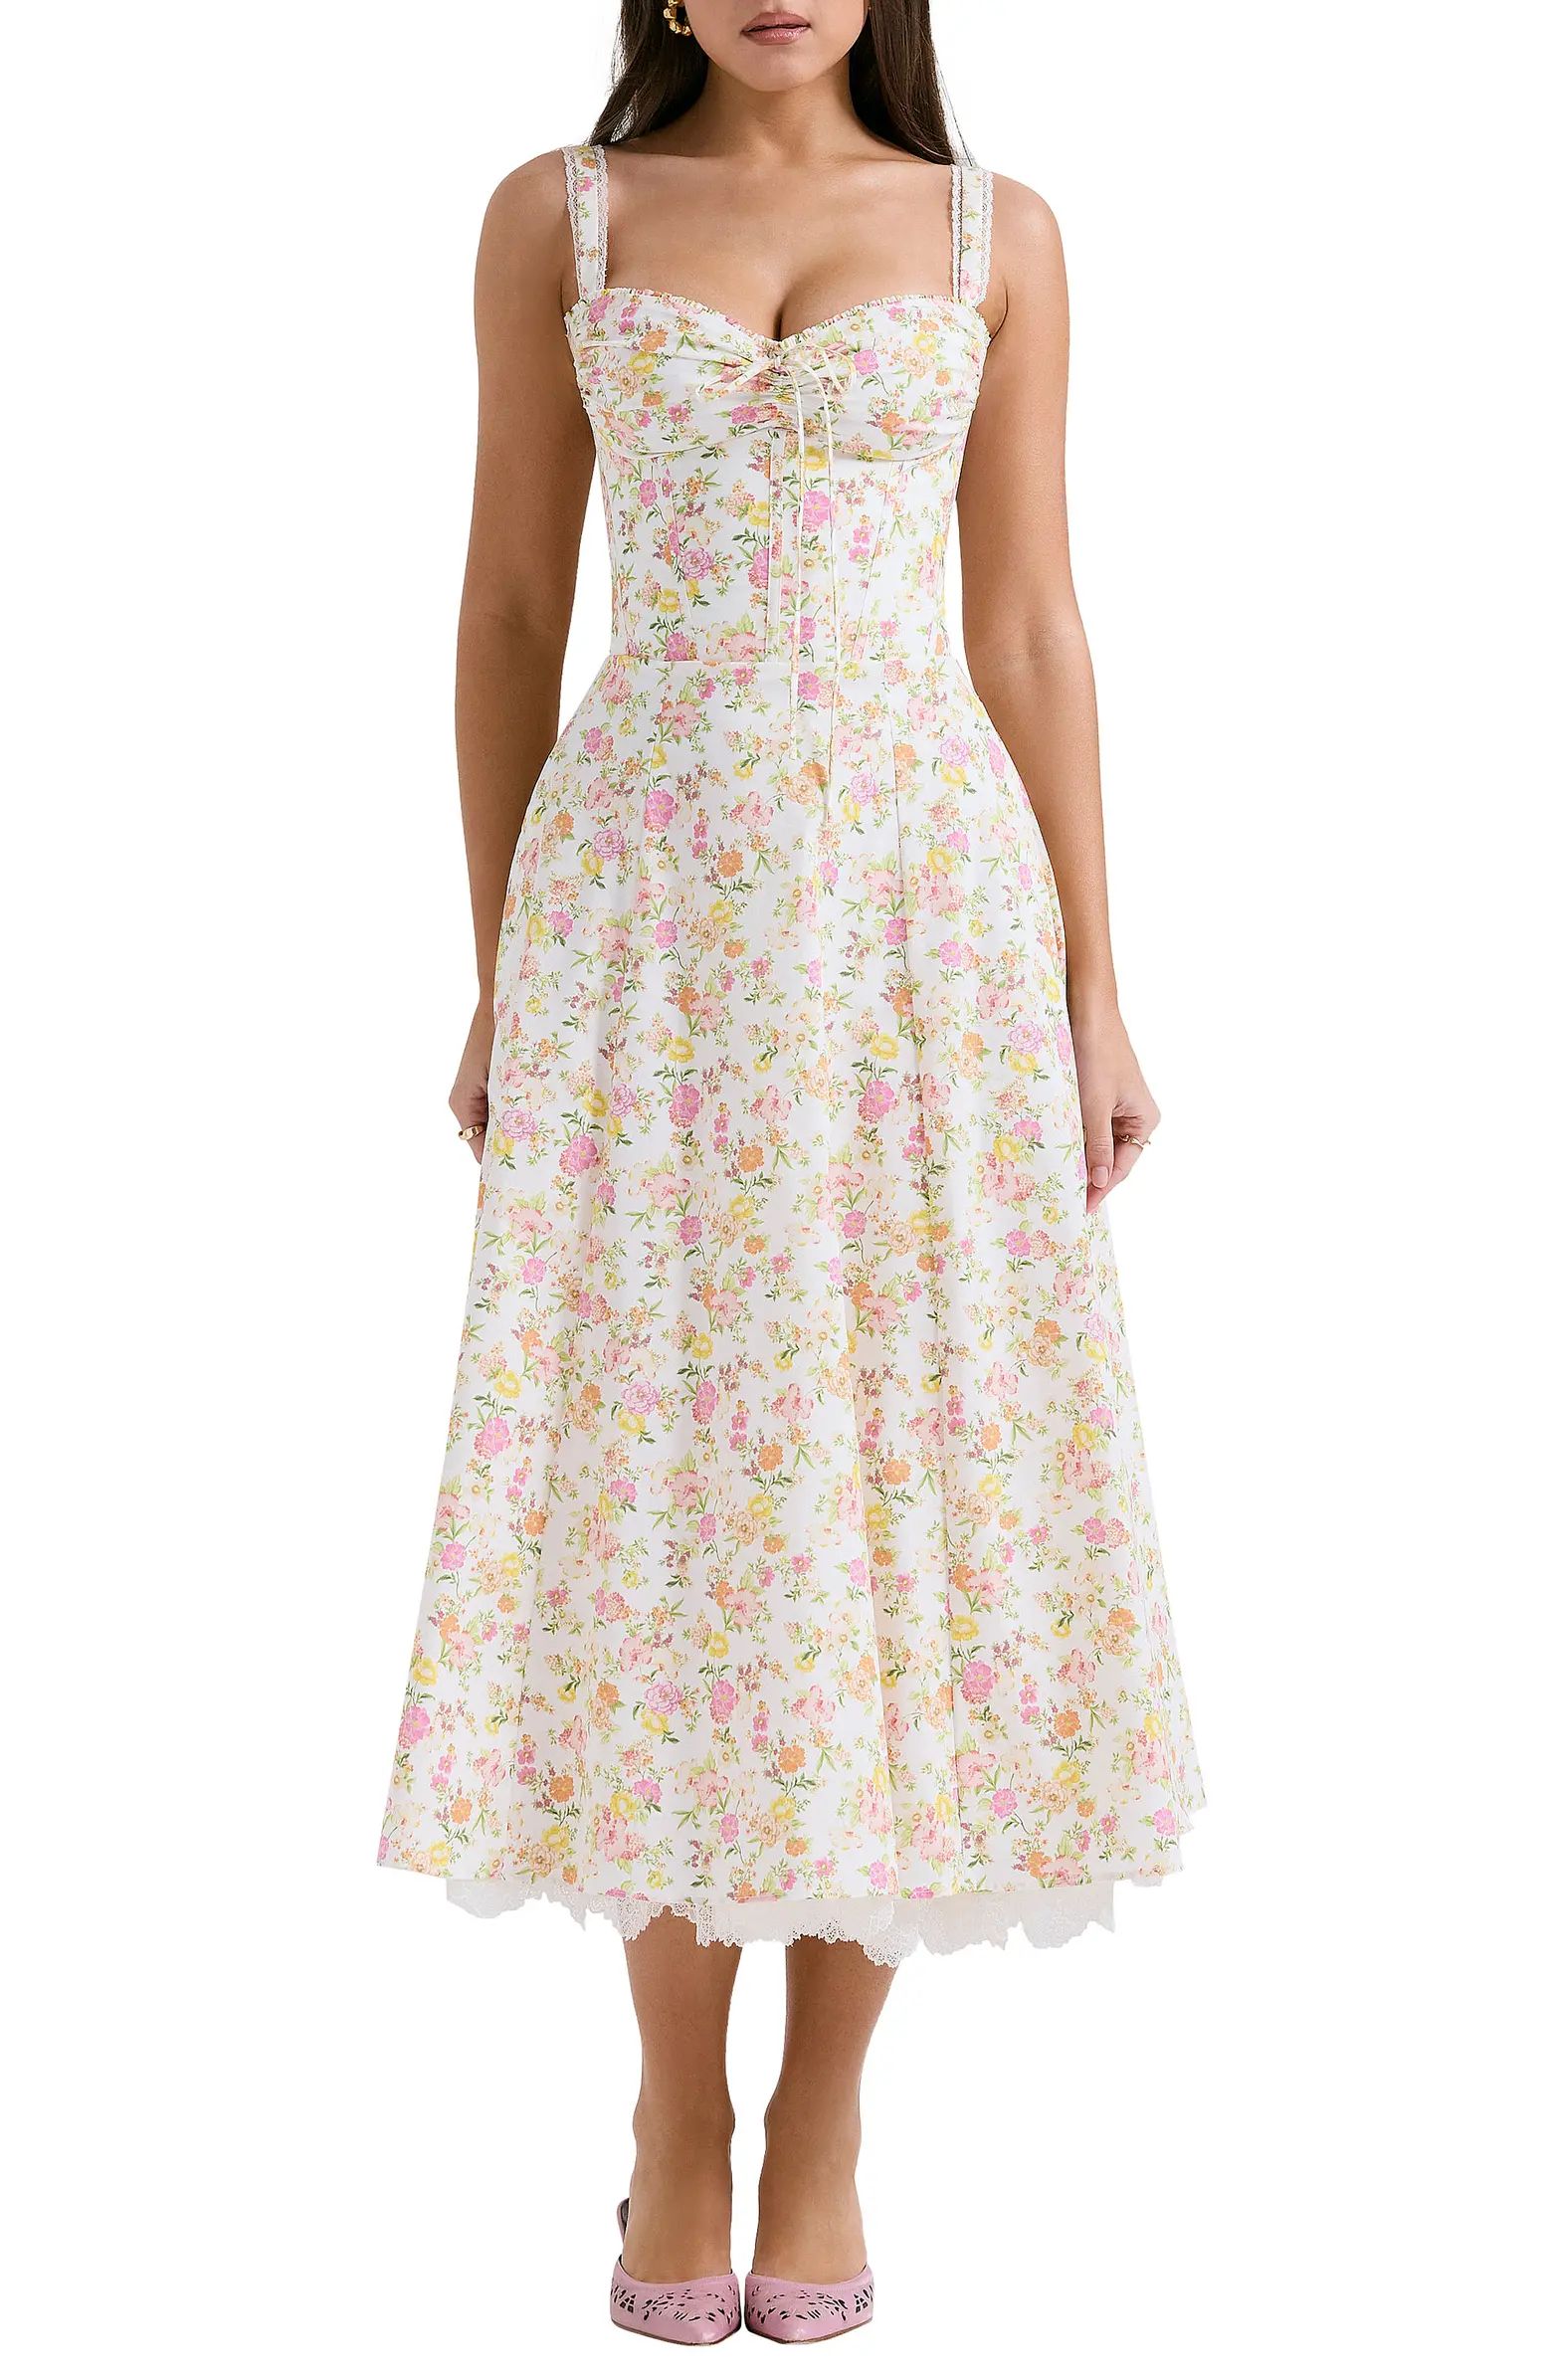 HOUSE OF CB Rosalee Floral Stretch Cotton Petticoat Dress | Nordstrom | Nordstrom